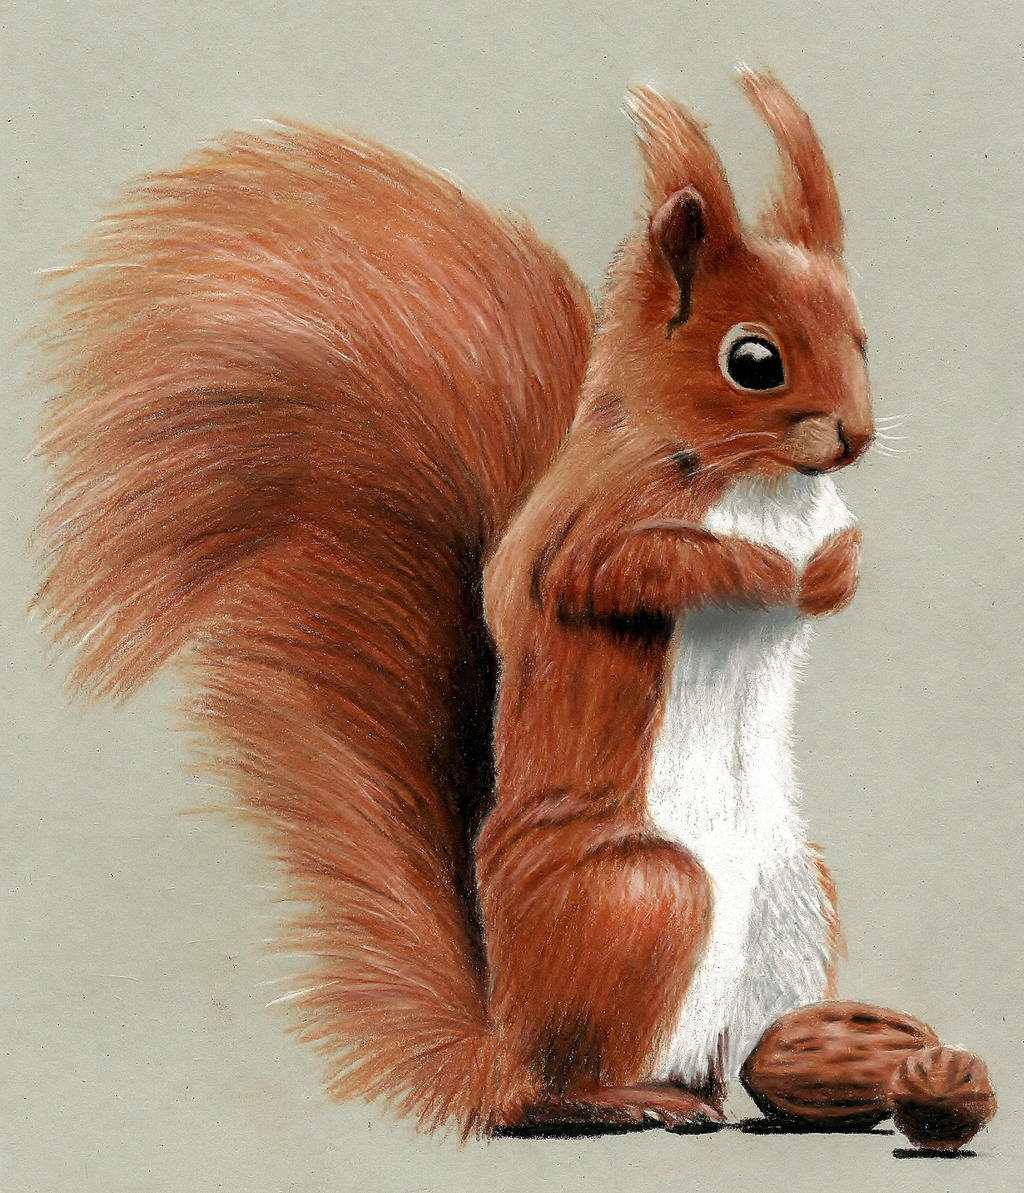 Cute Squirrel Drawing with Colored Pencils by JasminaSusak on DeviantArt